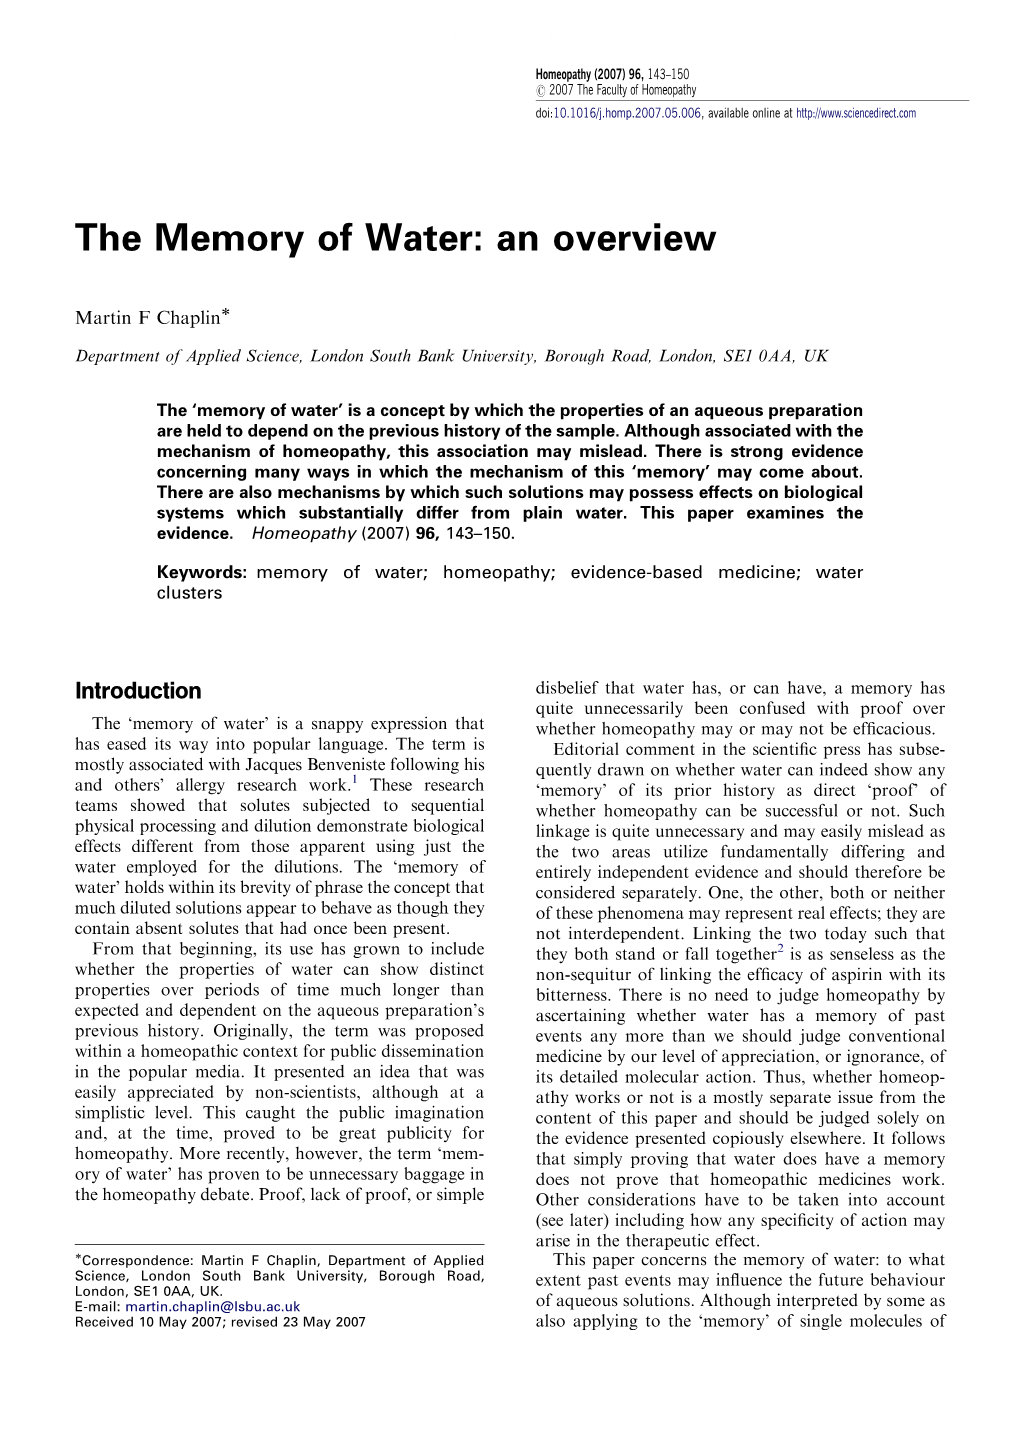 The Memory of Water: an Overview